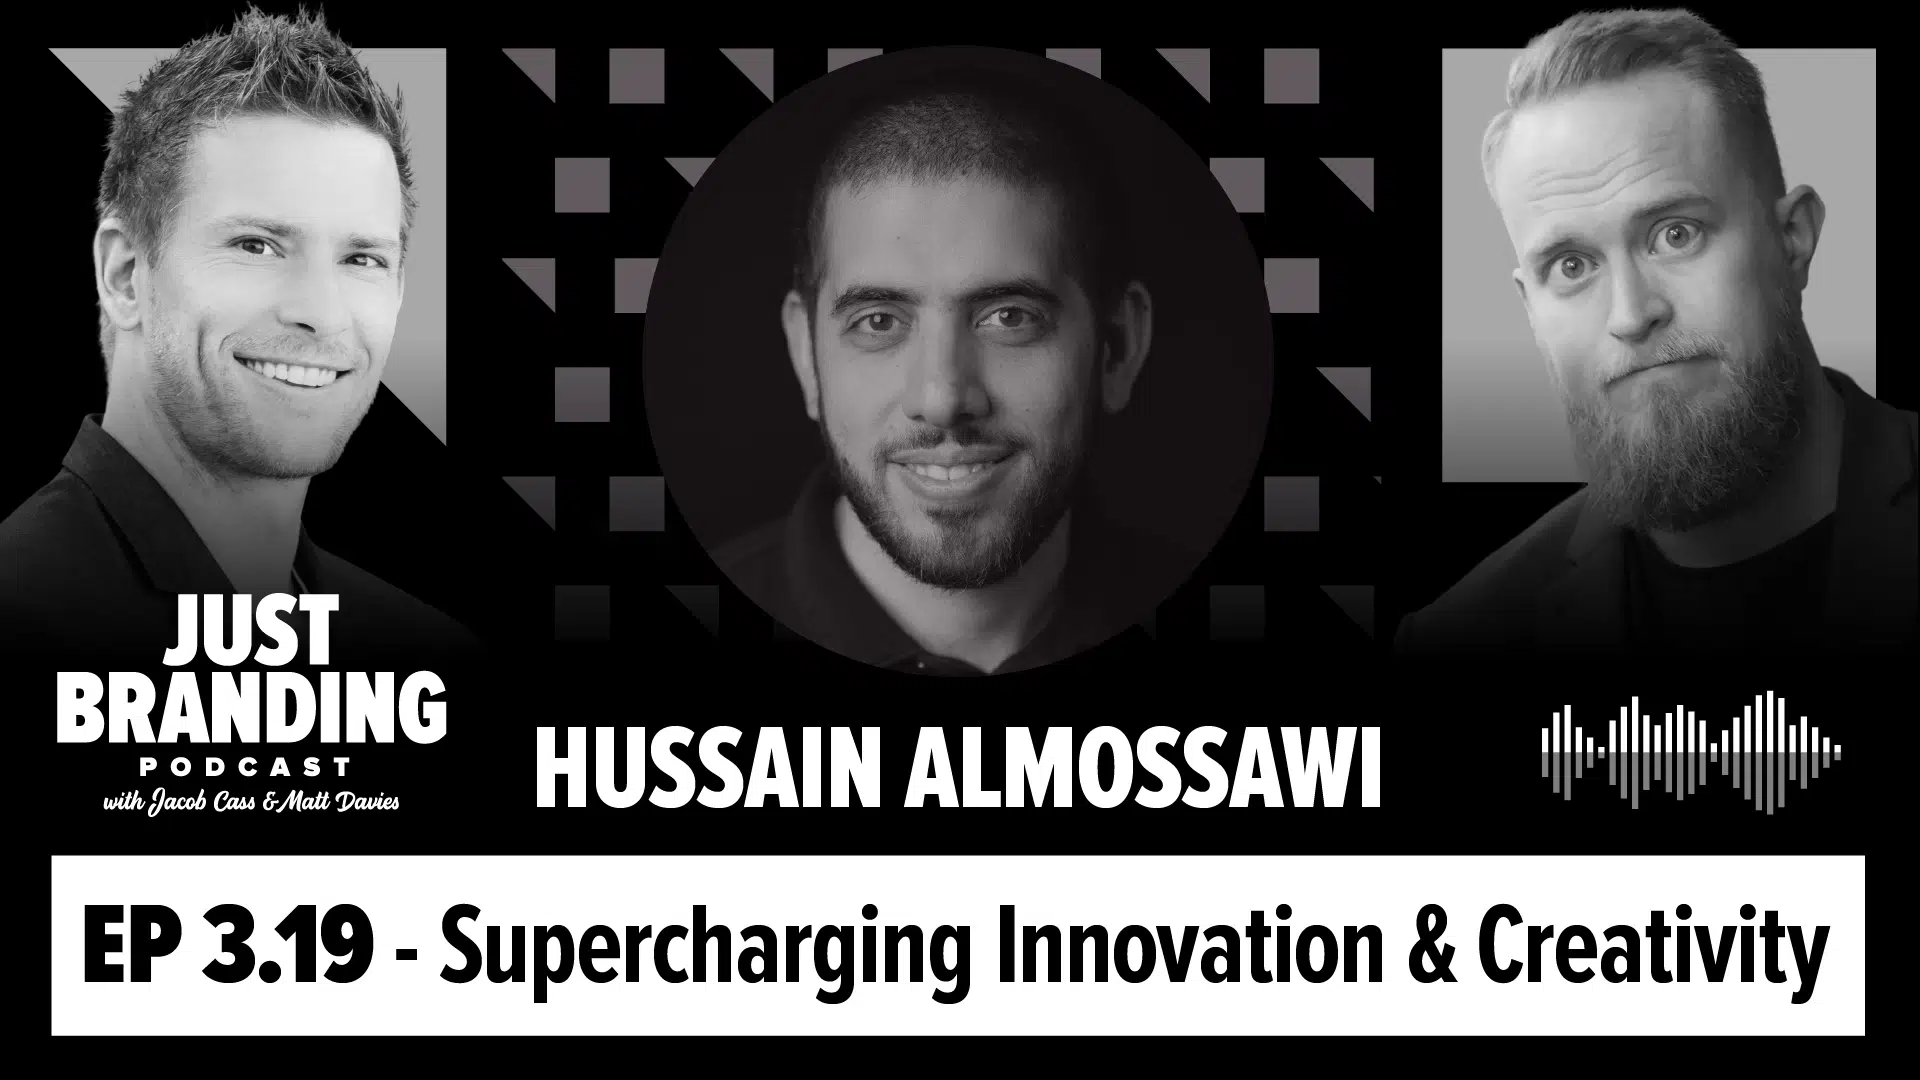 Supercharging Innovation & Creativity with Hussain Almossawi